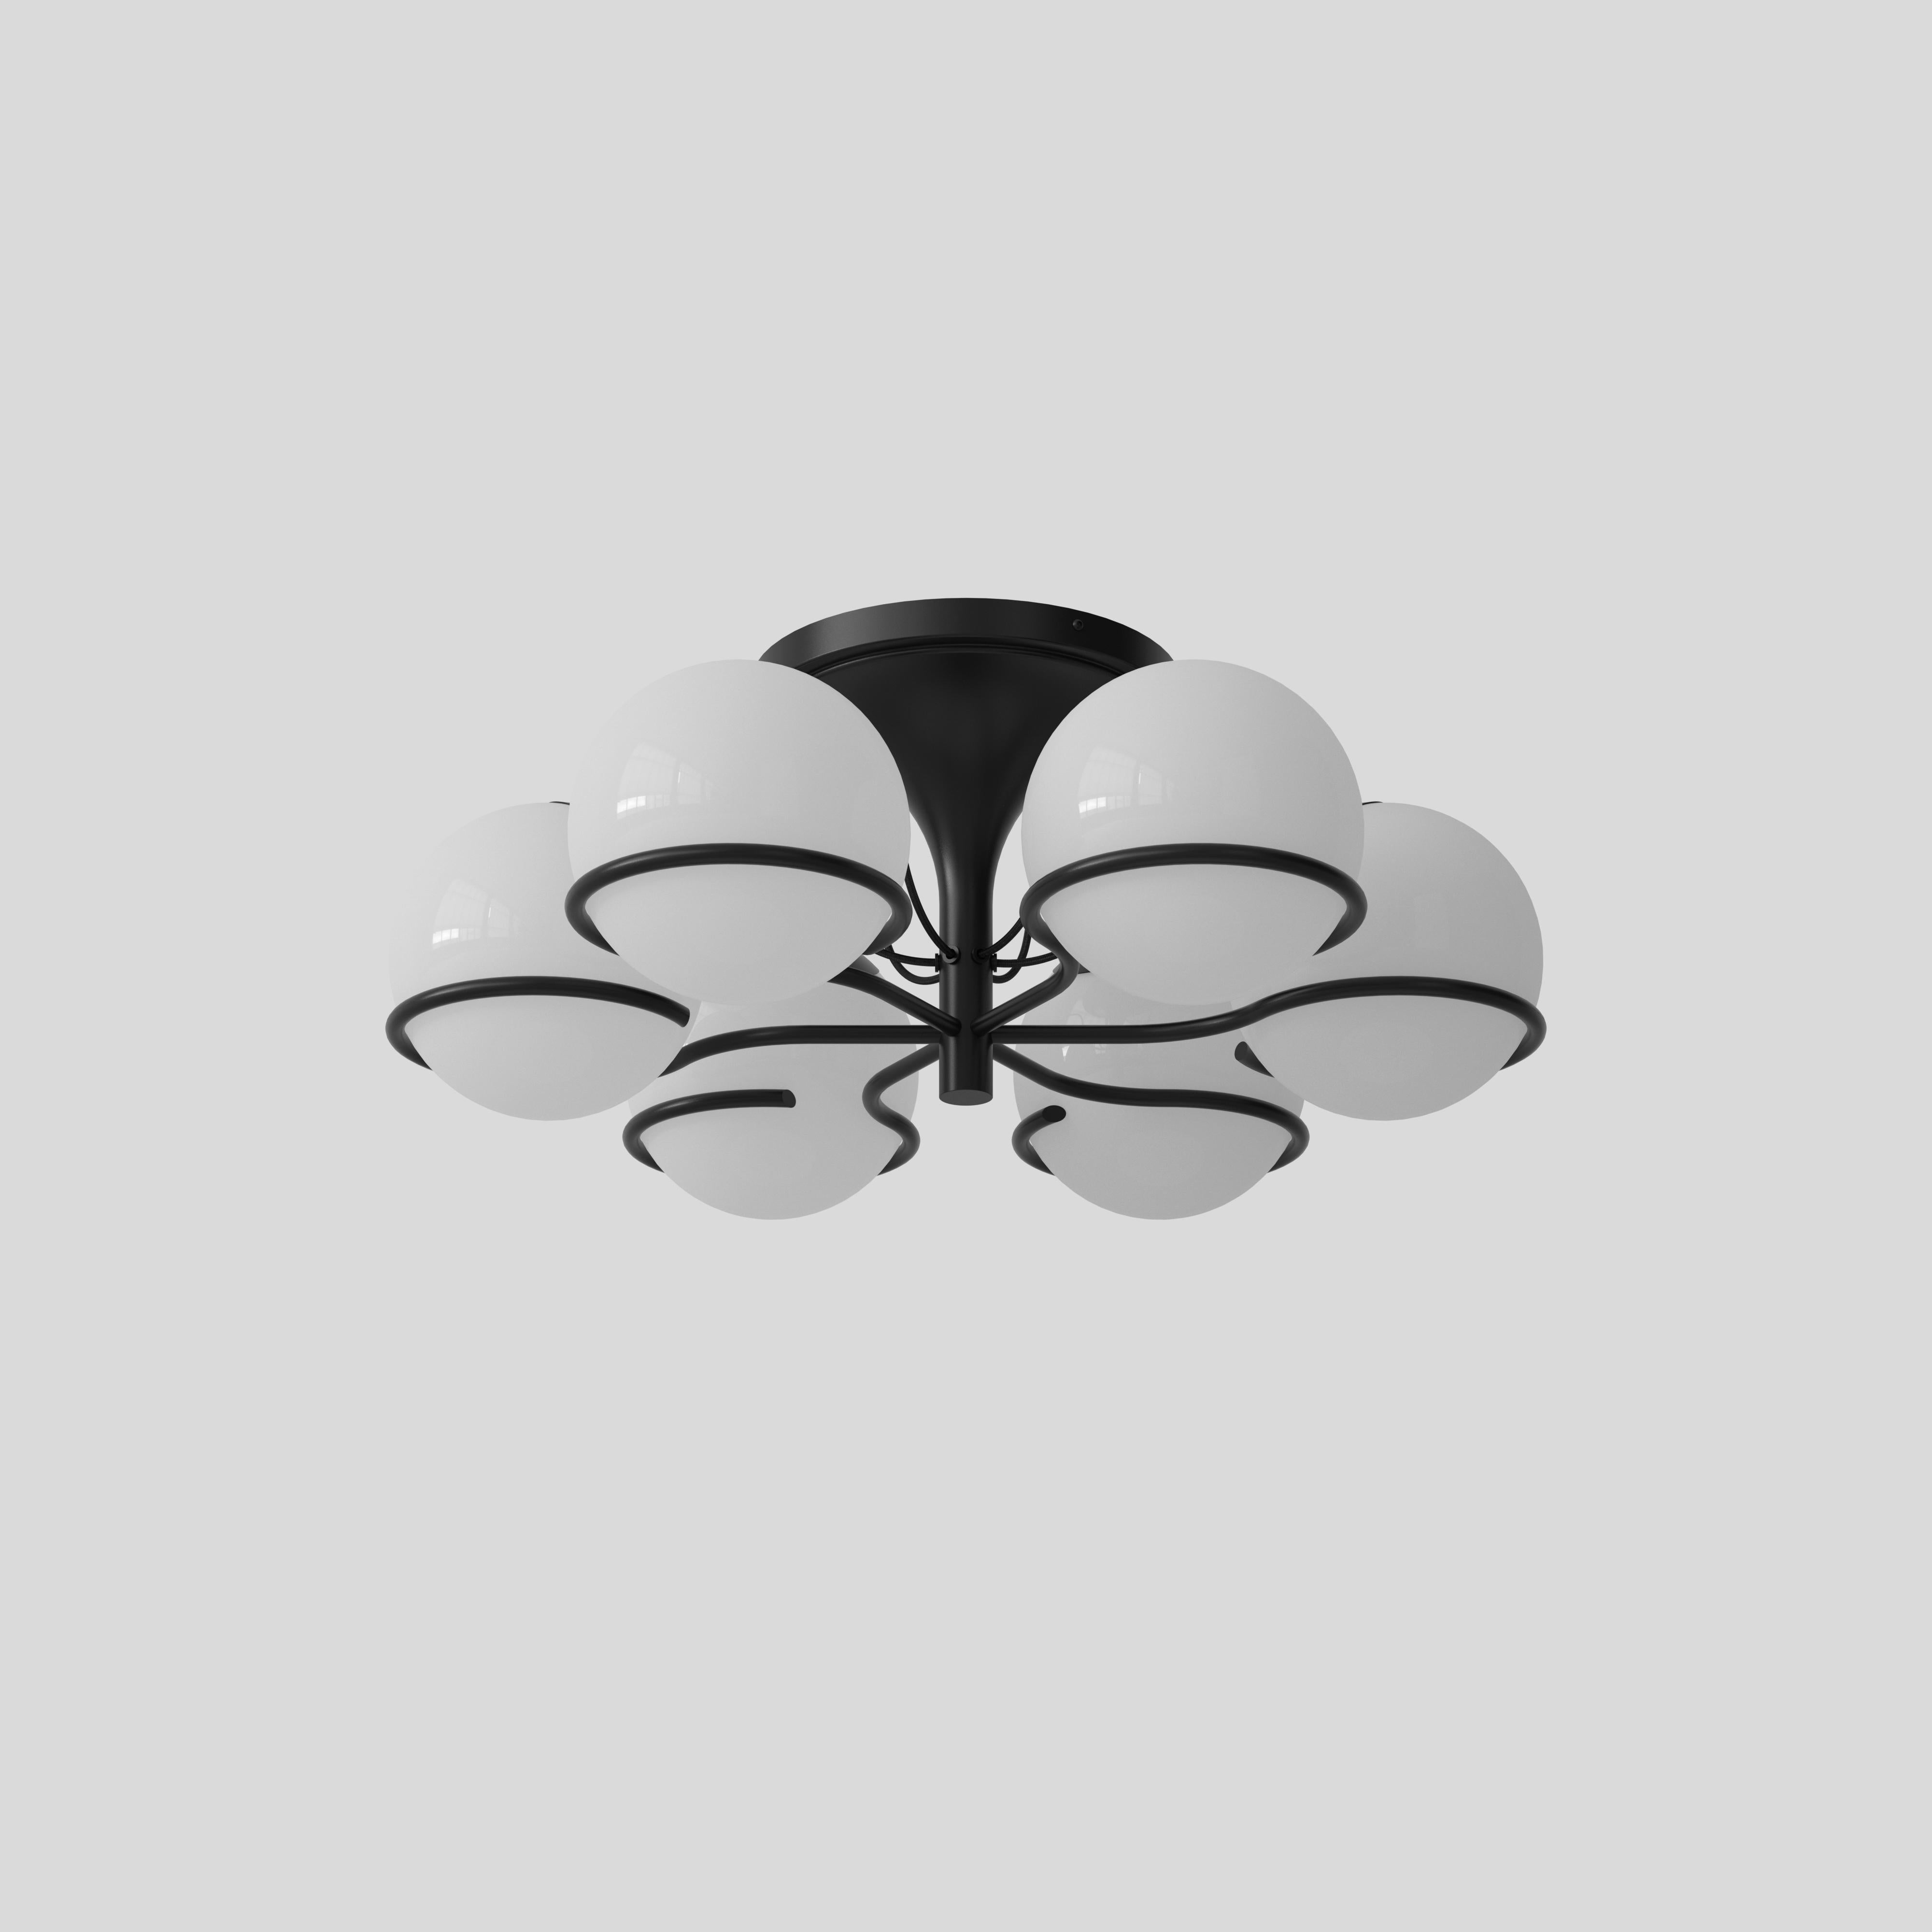 Model 2042/6
Design by Gino Sarfatti
With Le Sfere Plafone, Model 2042/6 from 1963, another of Gino Sarfatti’s beautiful interpretations of the luminous sphere is reintroduced. The refined ceiling light is composed of six blown opaline glass spheres